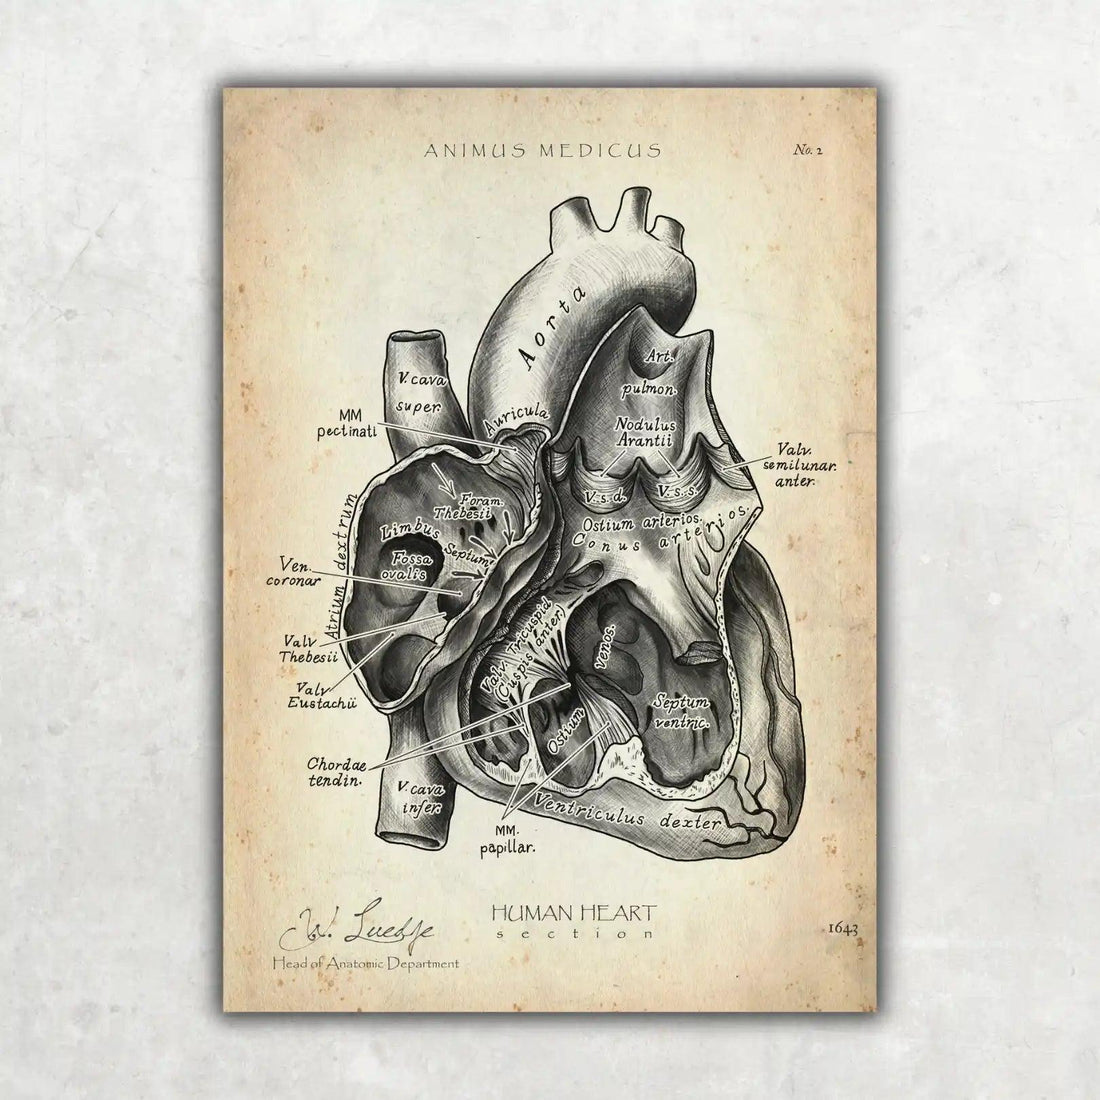 Vintage anatomy pictures of Animus kind wall as – GmbH Medicus decoration a special